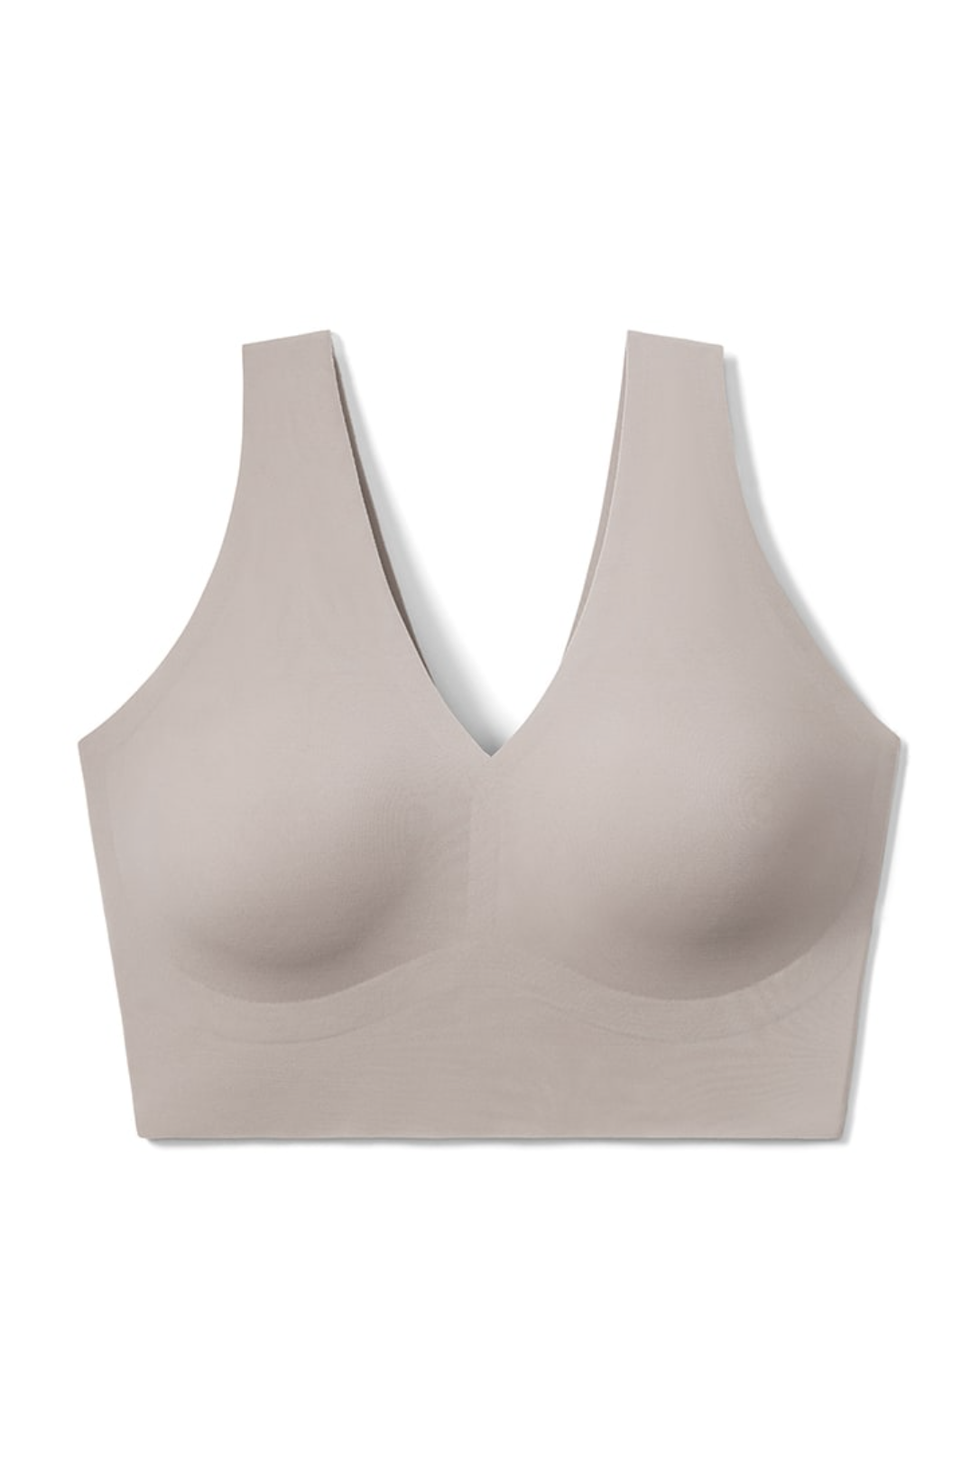 Best Very Lightly Used Bras For Sale for sale in Sarver